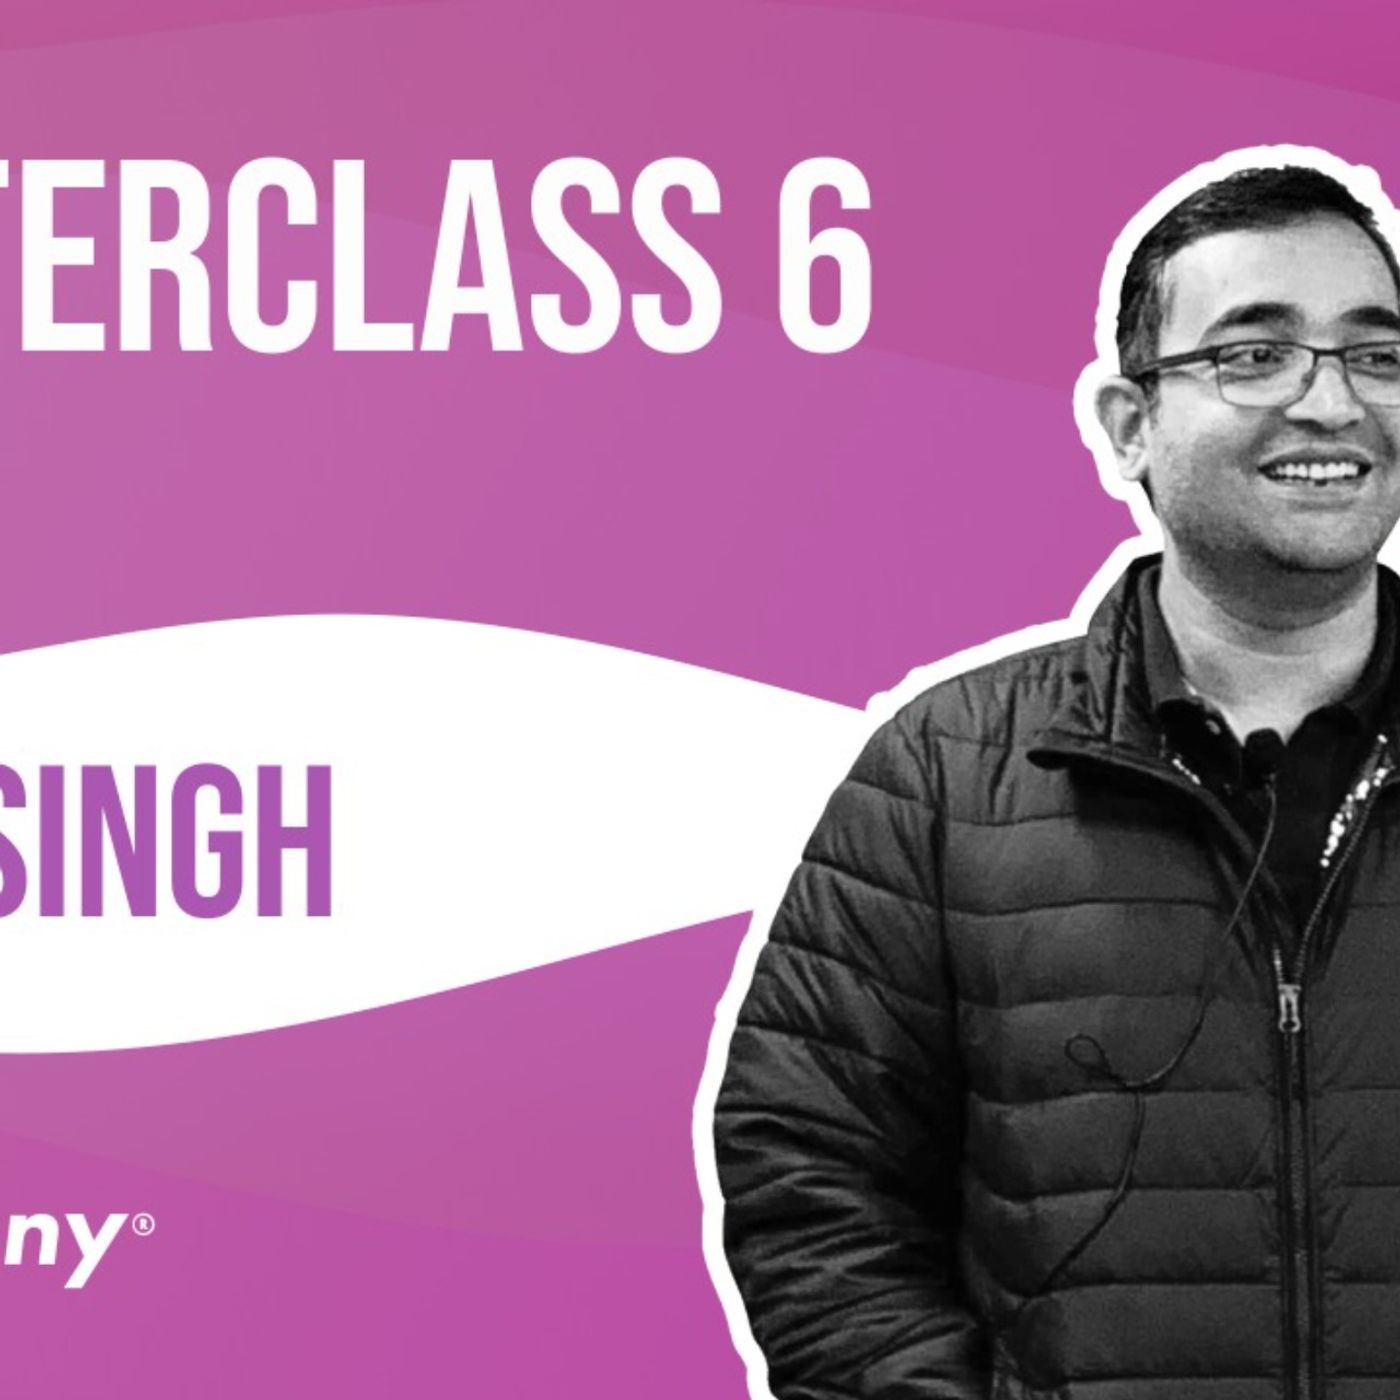 Masterclass #6: Spinny’s Lessons on Winning Customer Trust In A Crowded Market